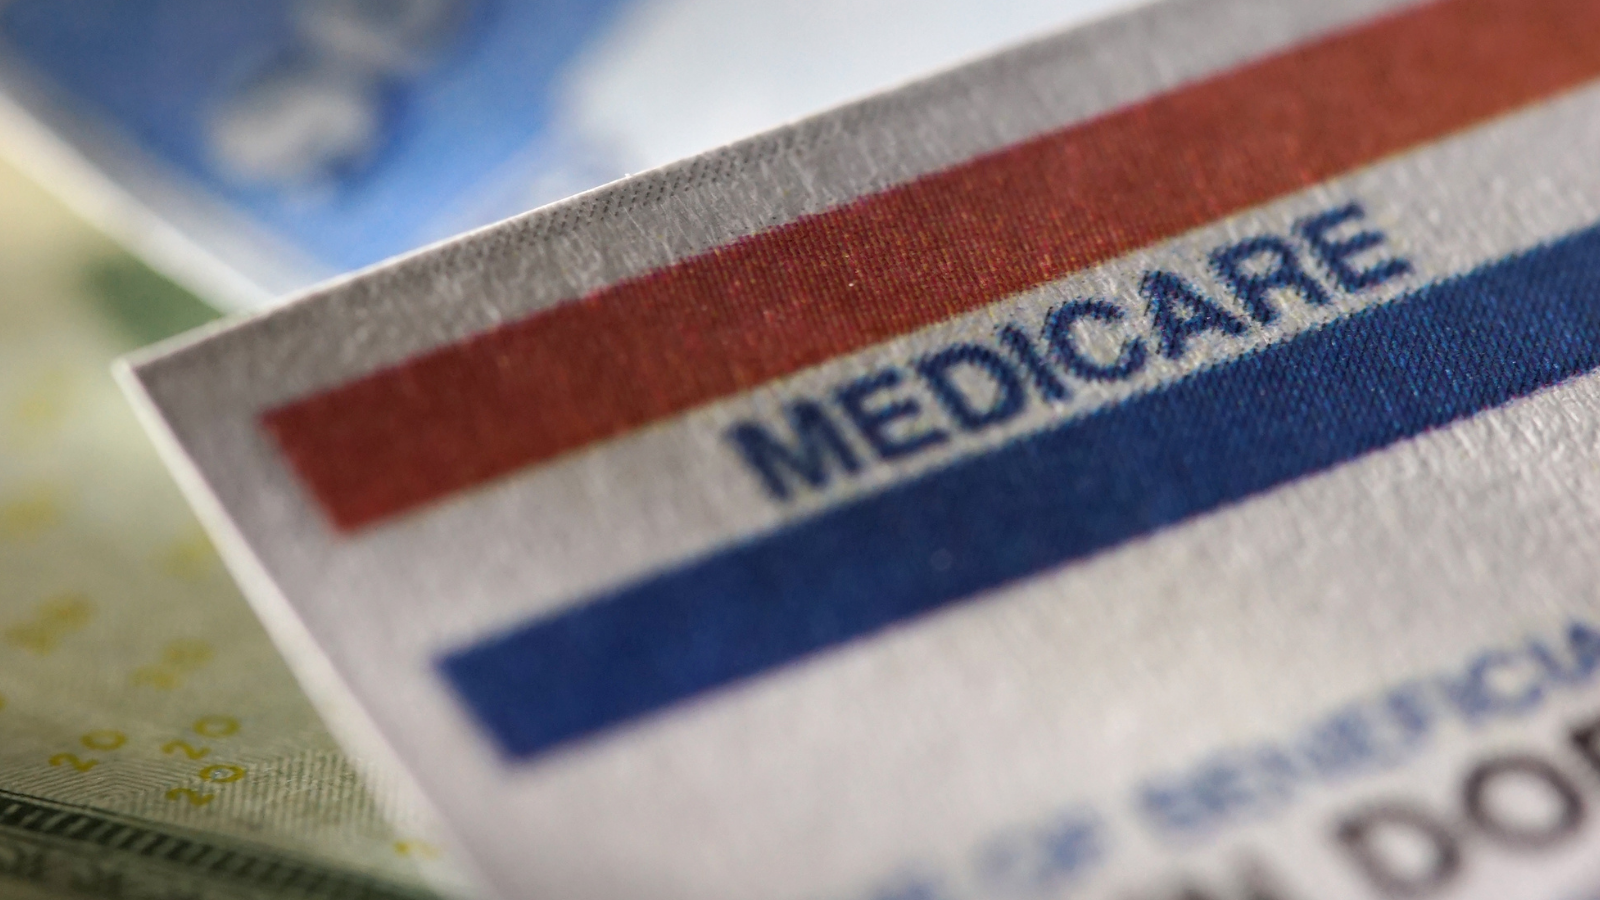 Image of a Medicare card